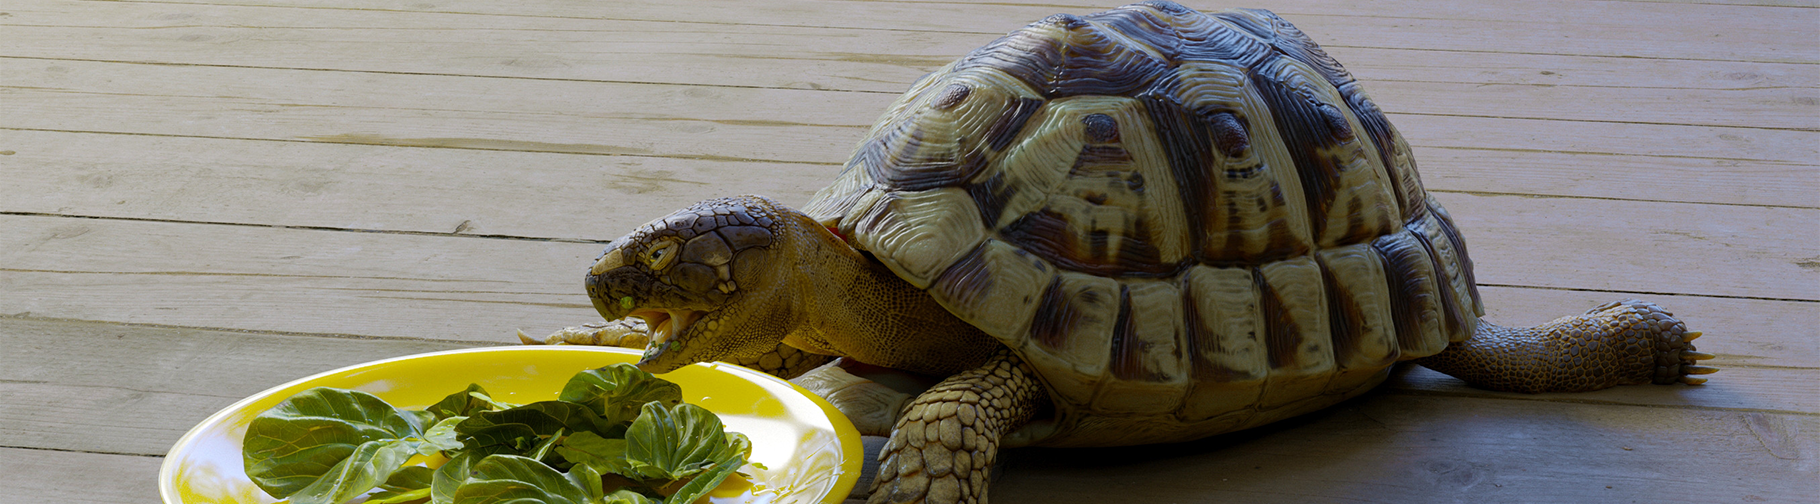 ZBrush model of a young and small Tortoise eating plants on a plate